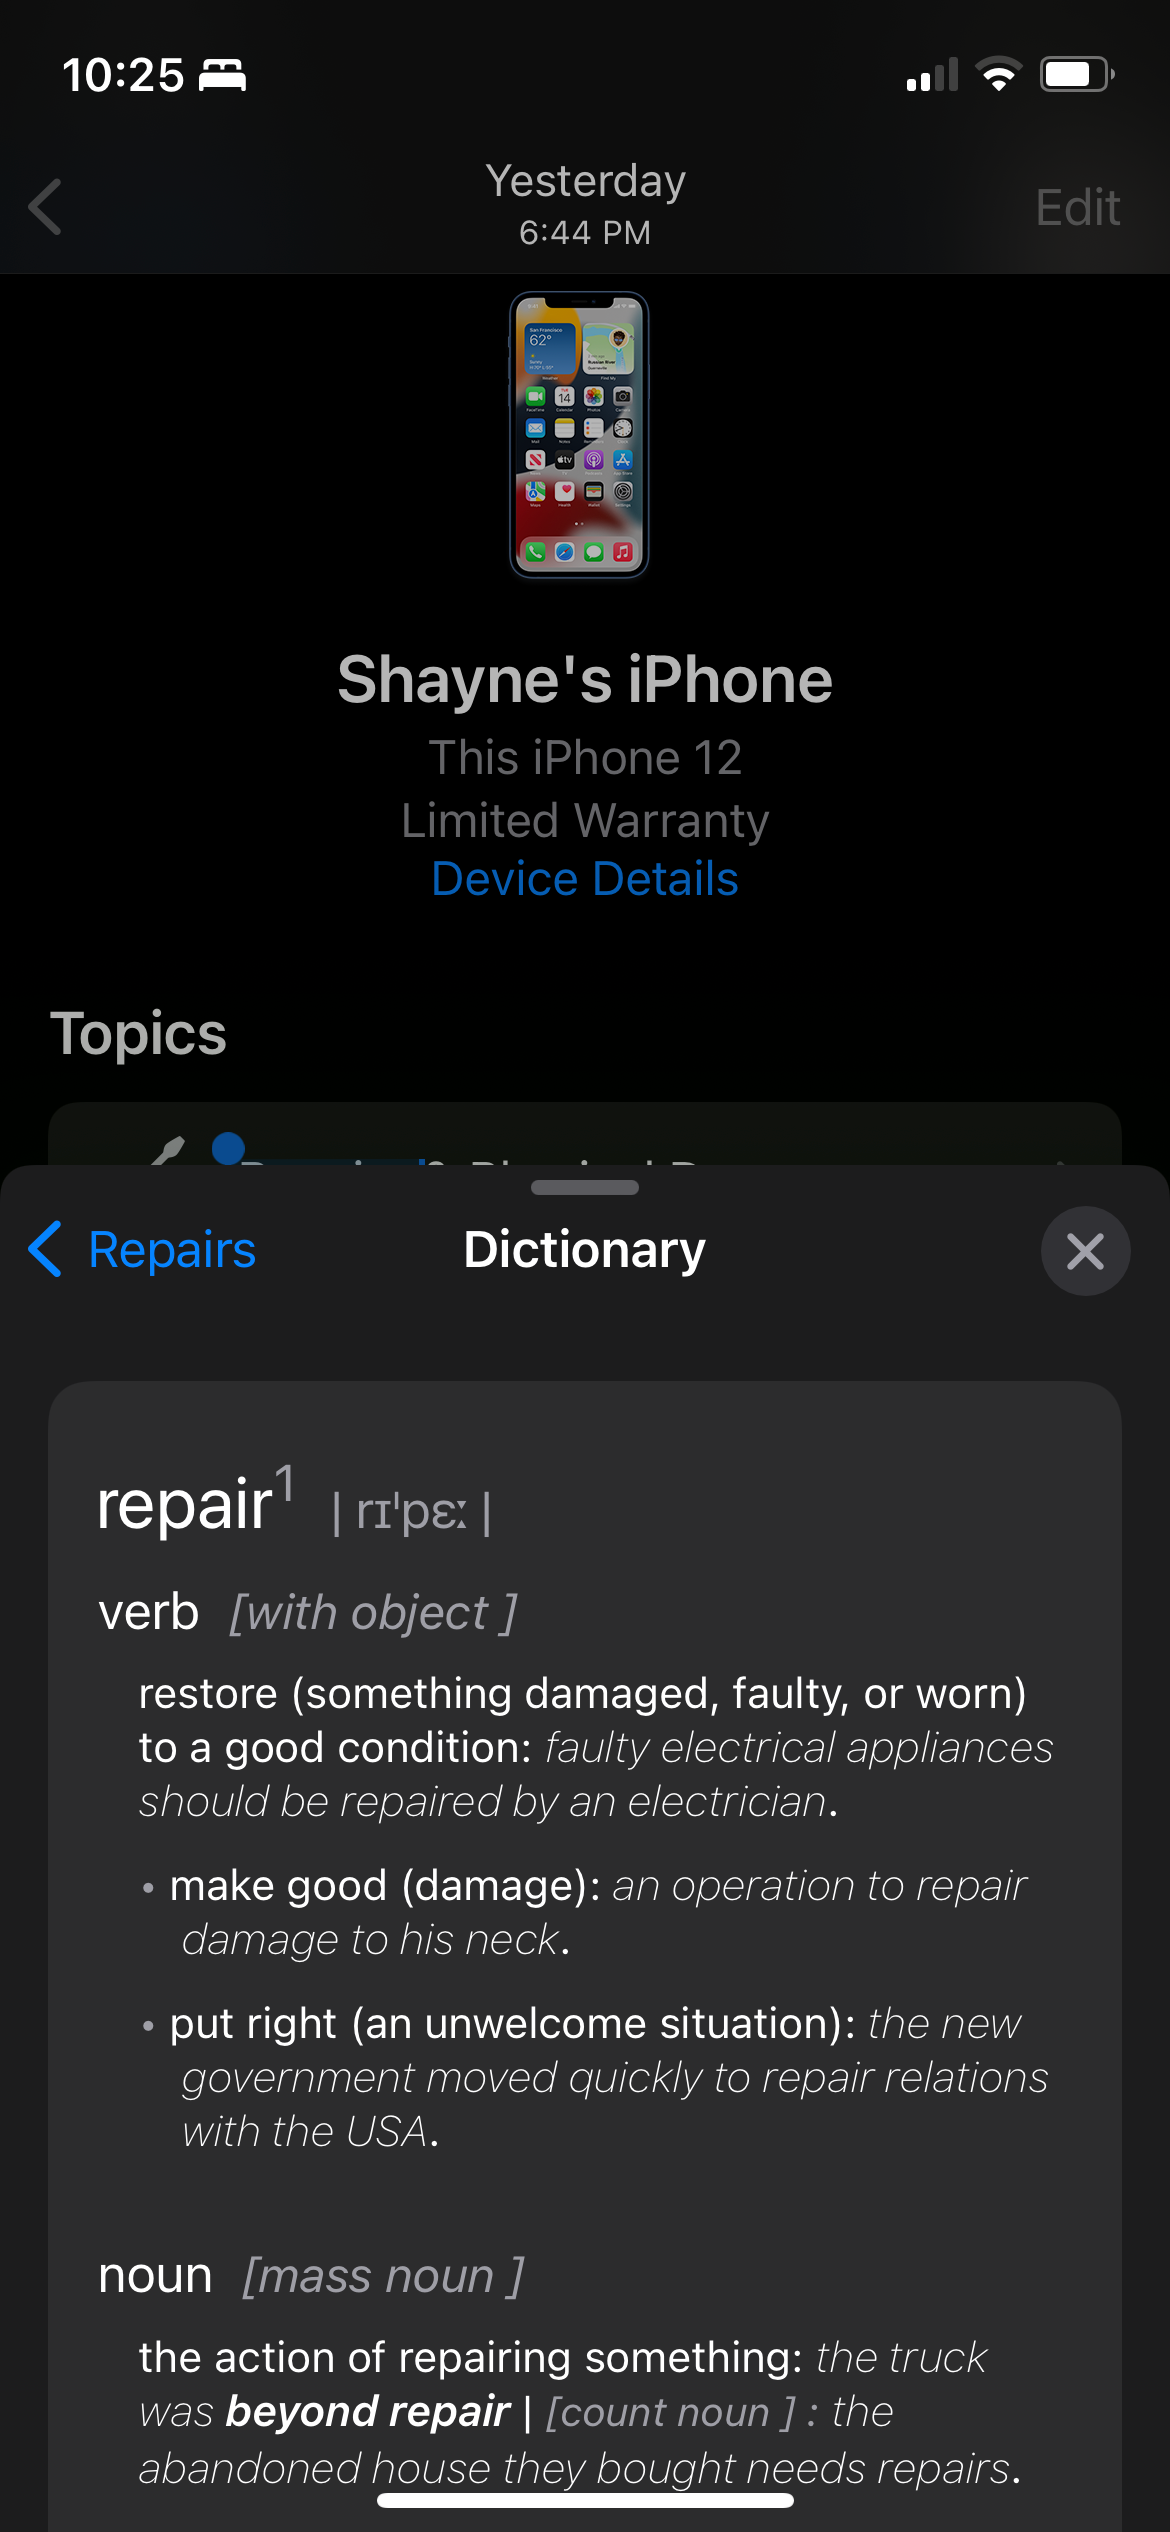 expanded definition of a word from iPhone's dictionary